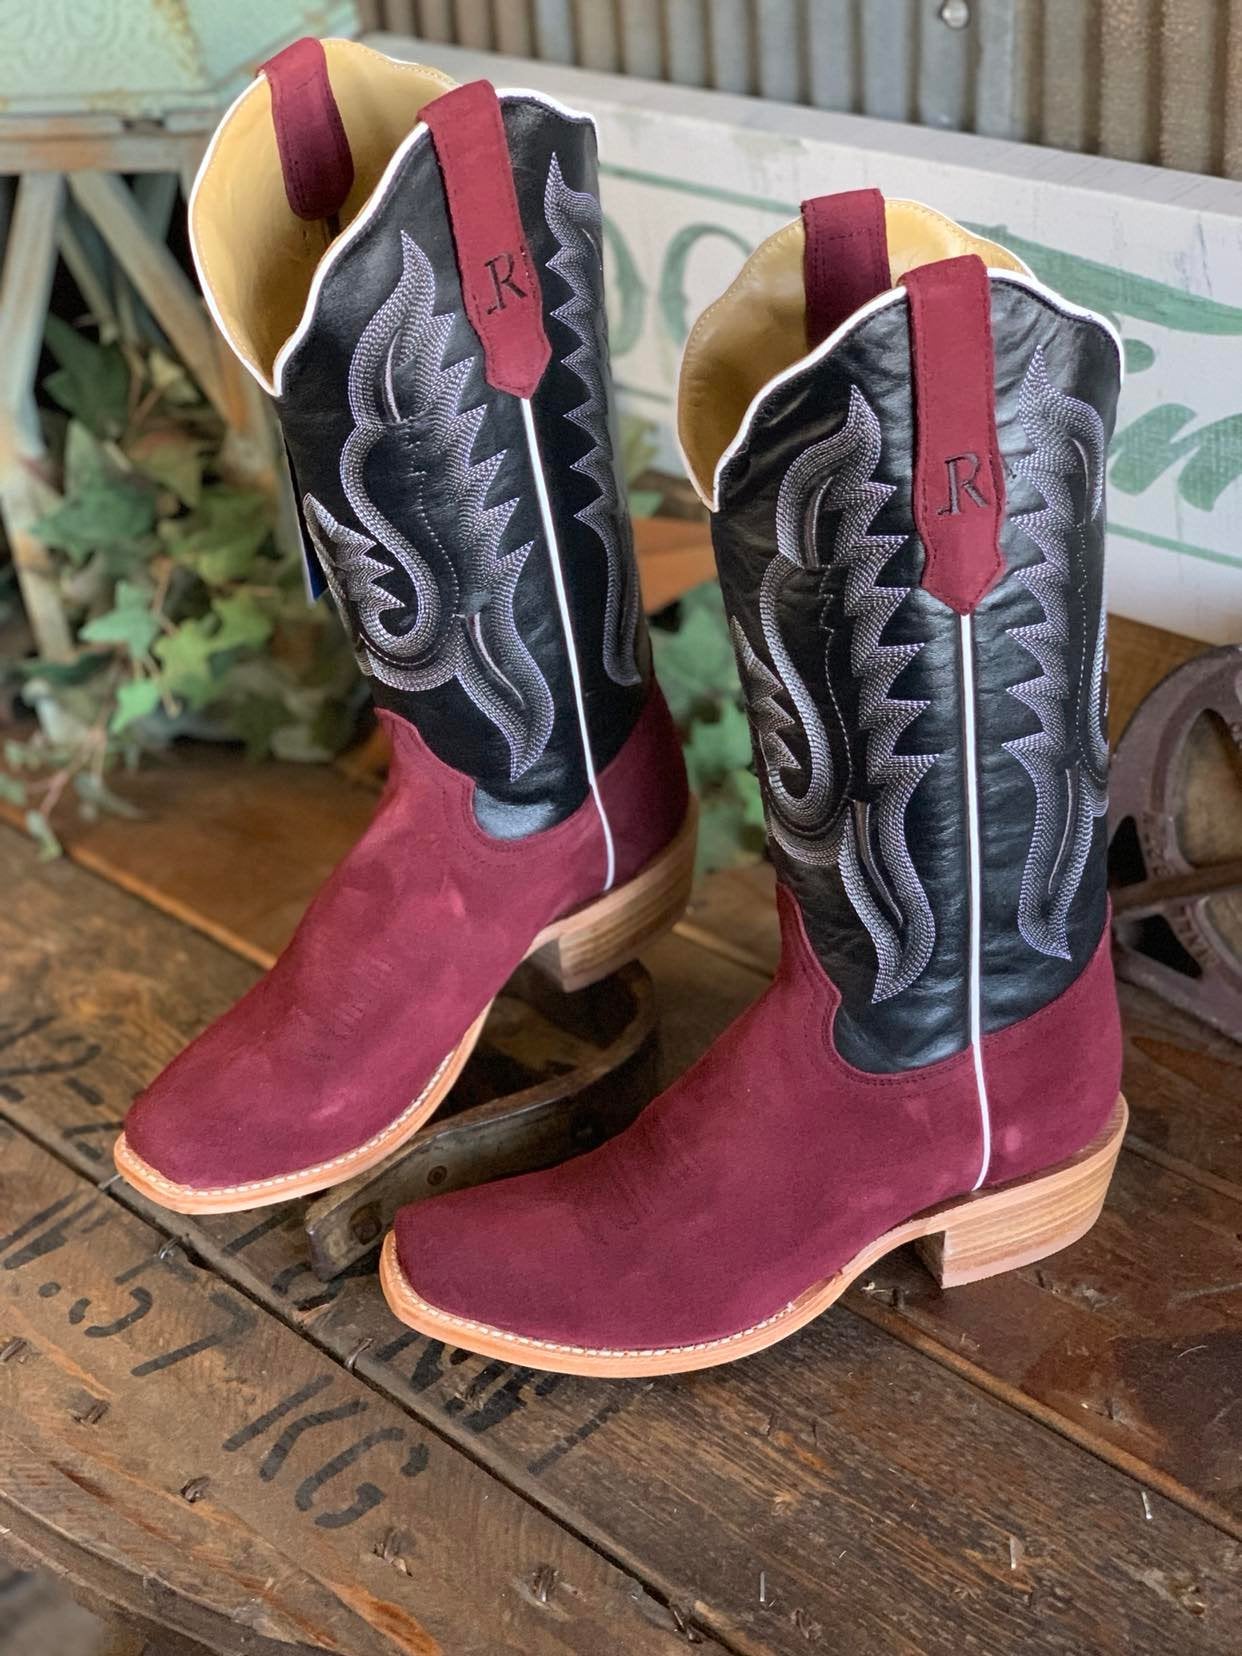 R. Watson Women’s Rhubarb Rough-Out & Black Sinatra Cowhide Boot-Women's Boots-R. Watson-Lucky J Boots & More, Women's, Men's, & Kids Western Store Located in Carthage, MO